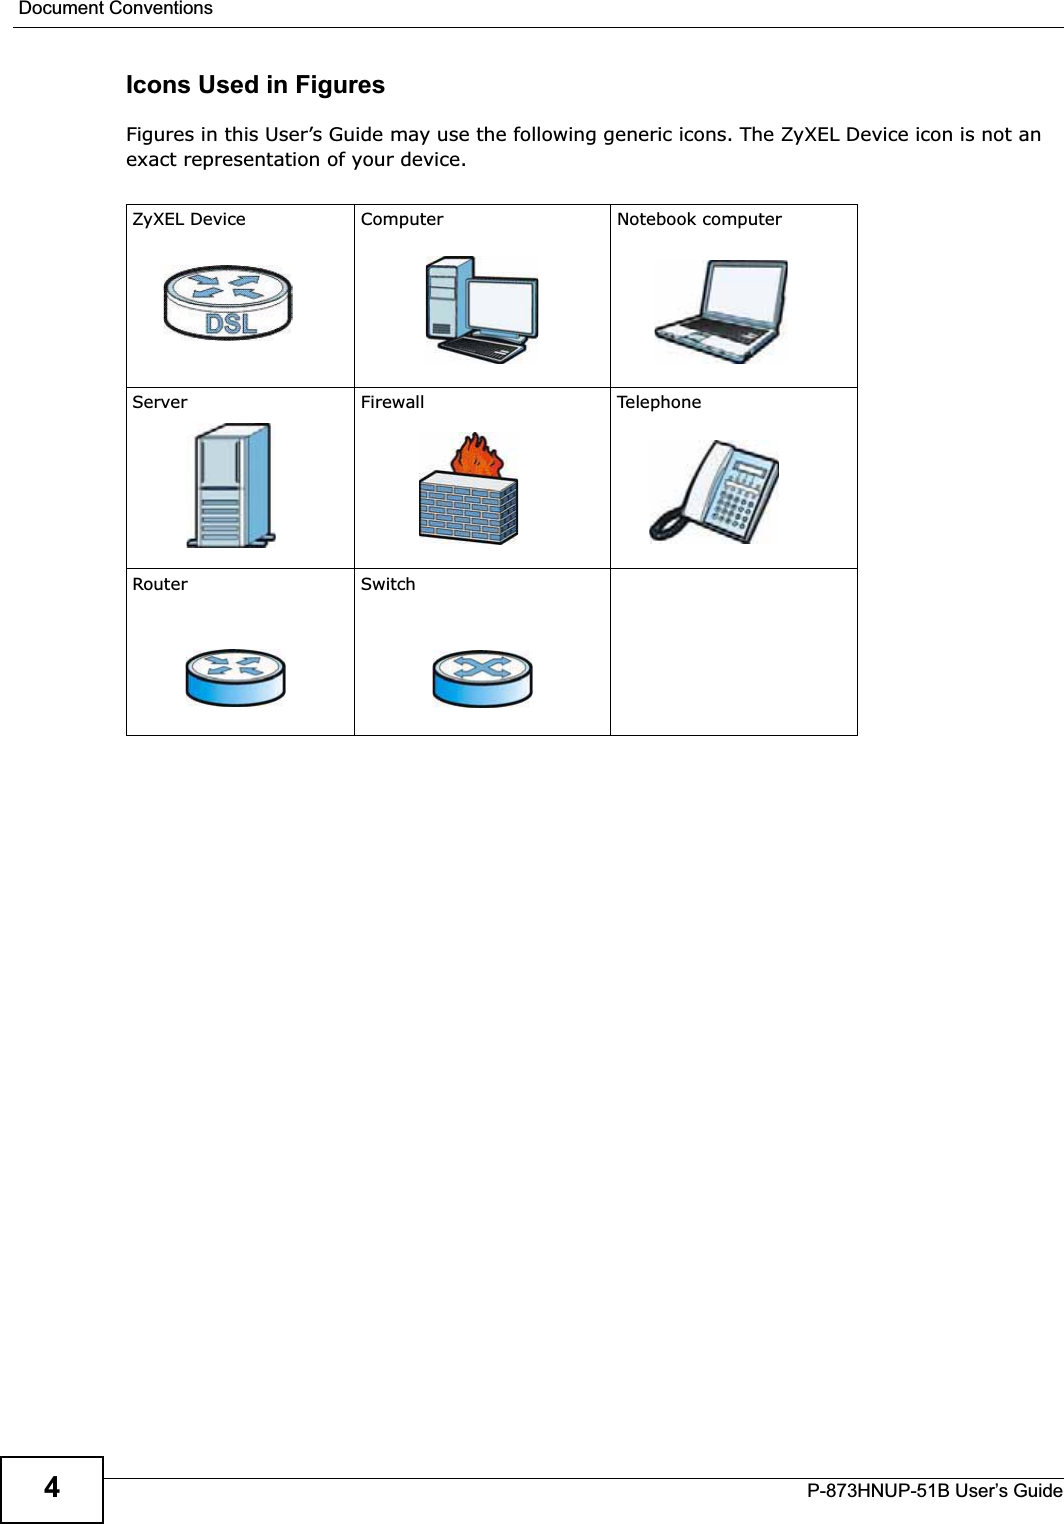 Document ConventionsP-873HNUP-51B User’s Guide4Icons Used in FiguresFigures in this User’s Guide may use the following generic icons. The ZyXEL Device icon is not an exact representation of your device.ZyXEL Device Computer Notebook computerServer Firewall Telep honeRouter Switch